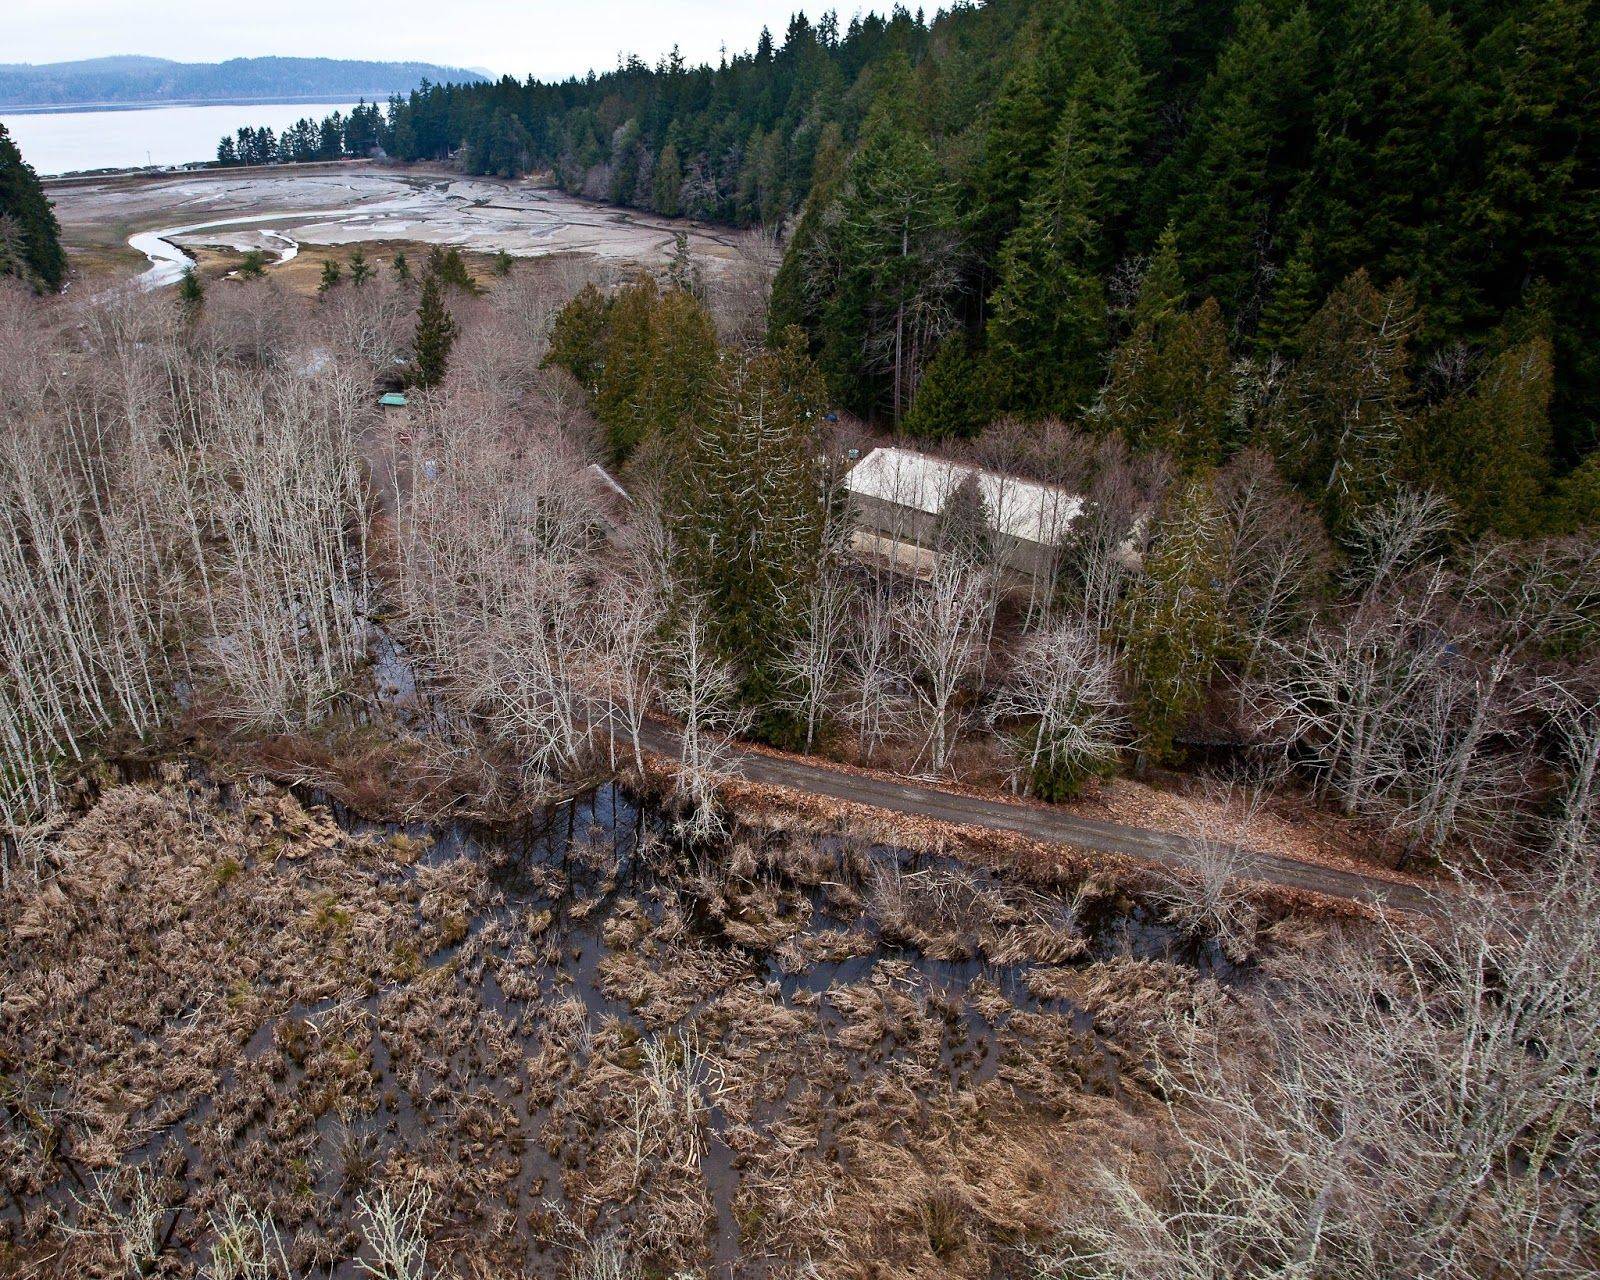 The Hood Canal Salmon Enhancement Group was awarded a $569,653 grant to purchase roughly 297 acres in the lower Big Beef Creek watershed. Photo courtesy Washington State Recreation and Conservation Office